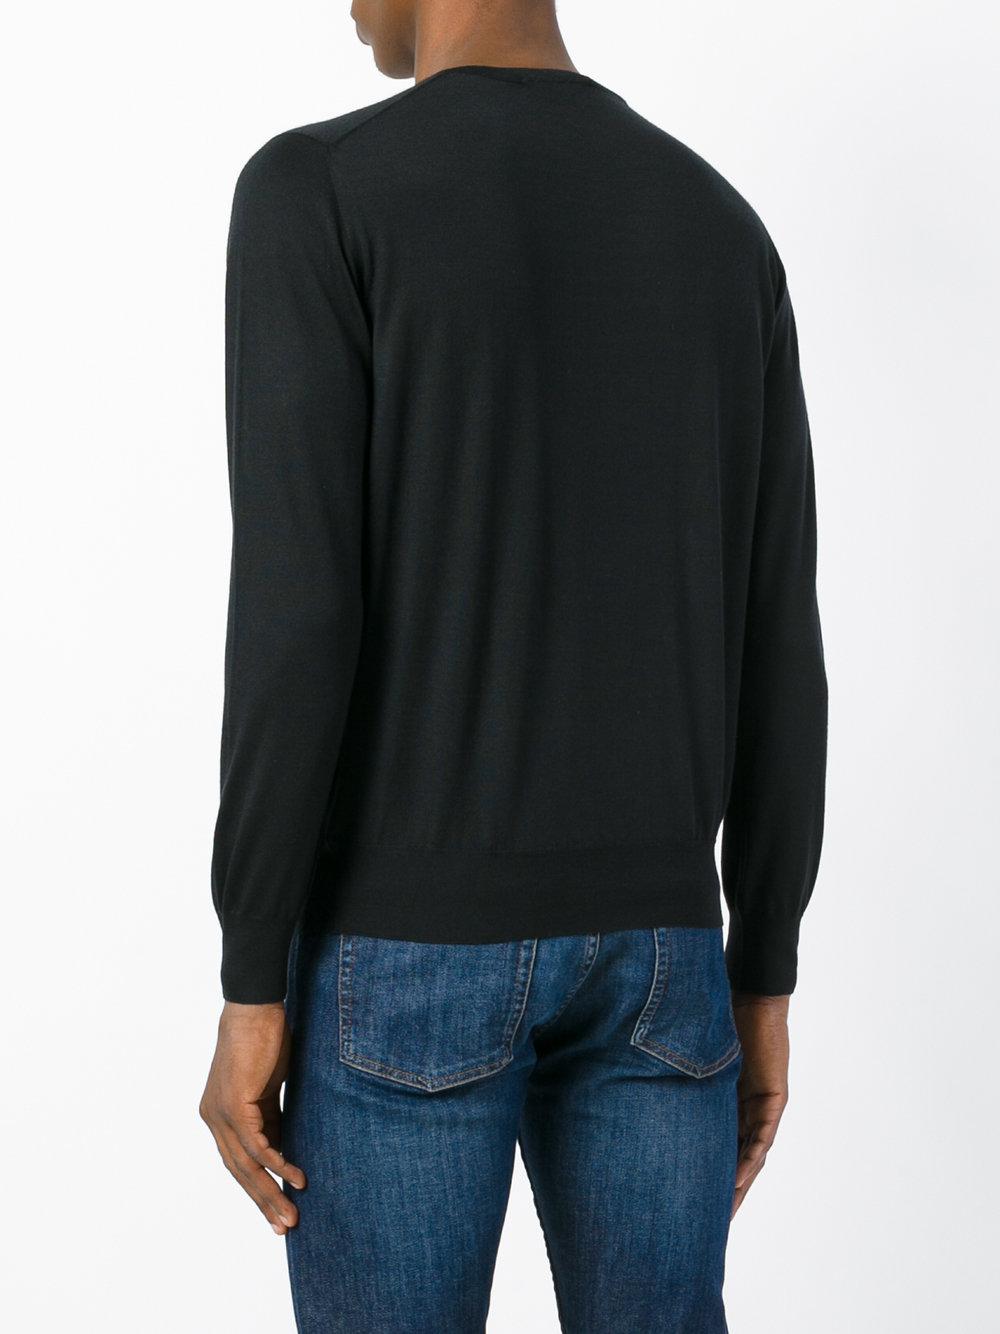 Cruciani Cashmere Crew Neck Sweater in Blue for Men - Lyst